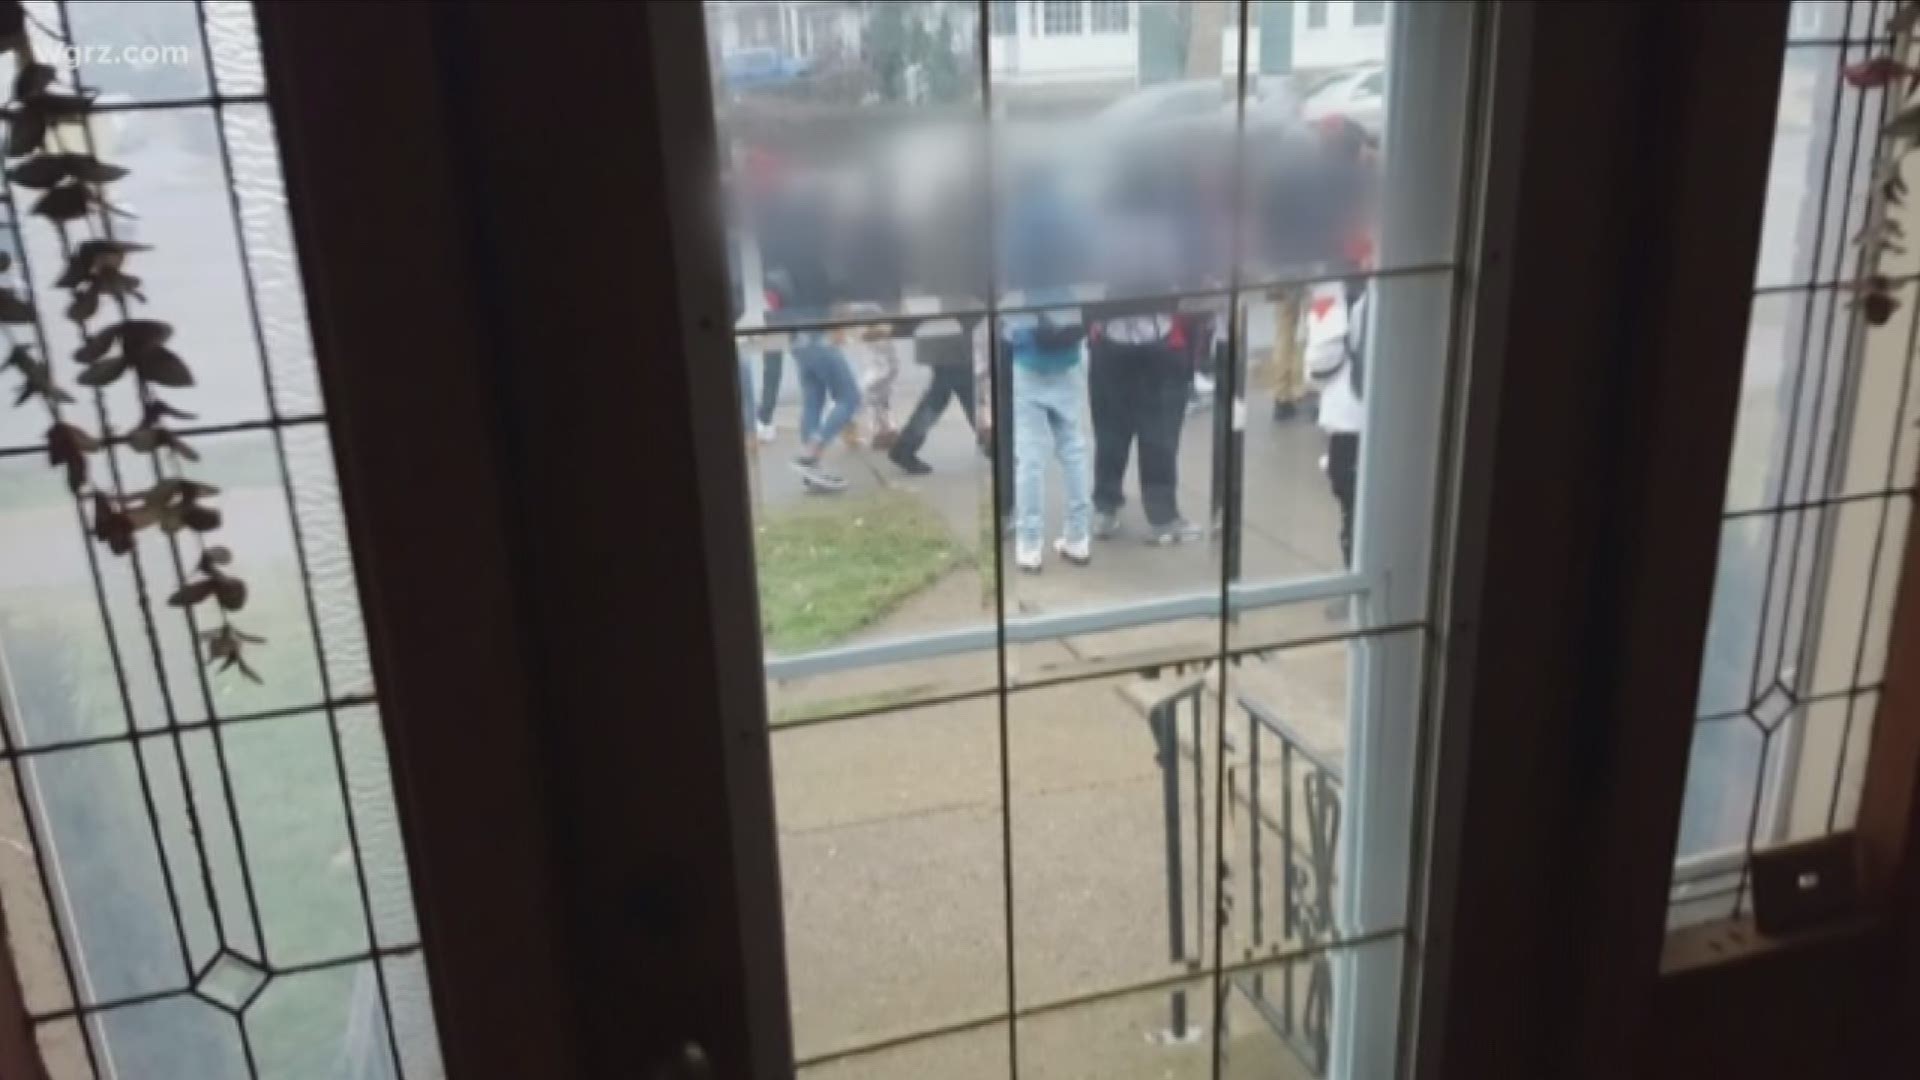 Neighbors shared pictures of students behavior